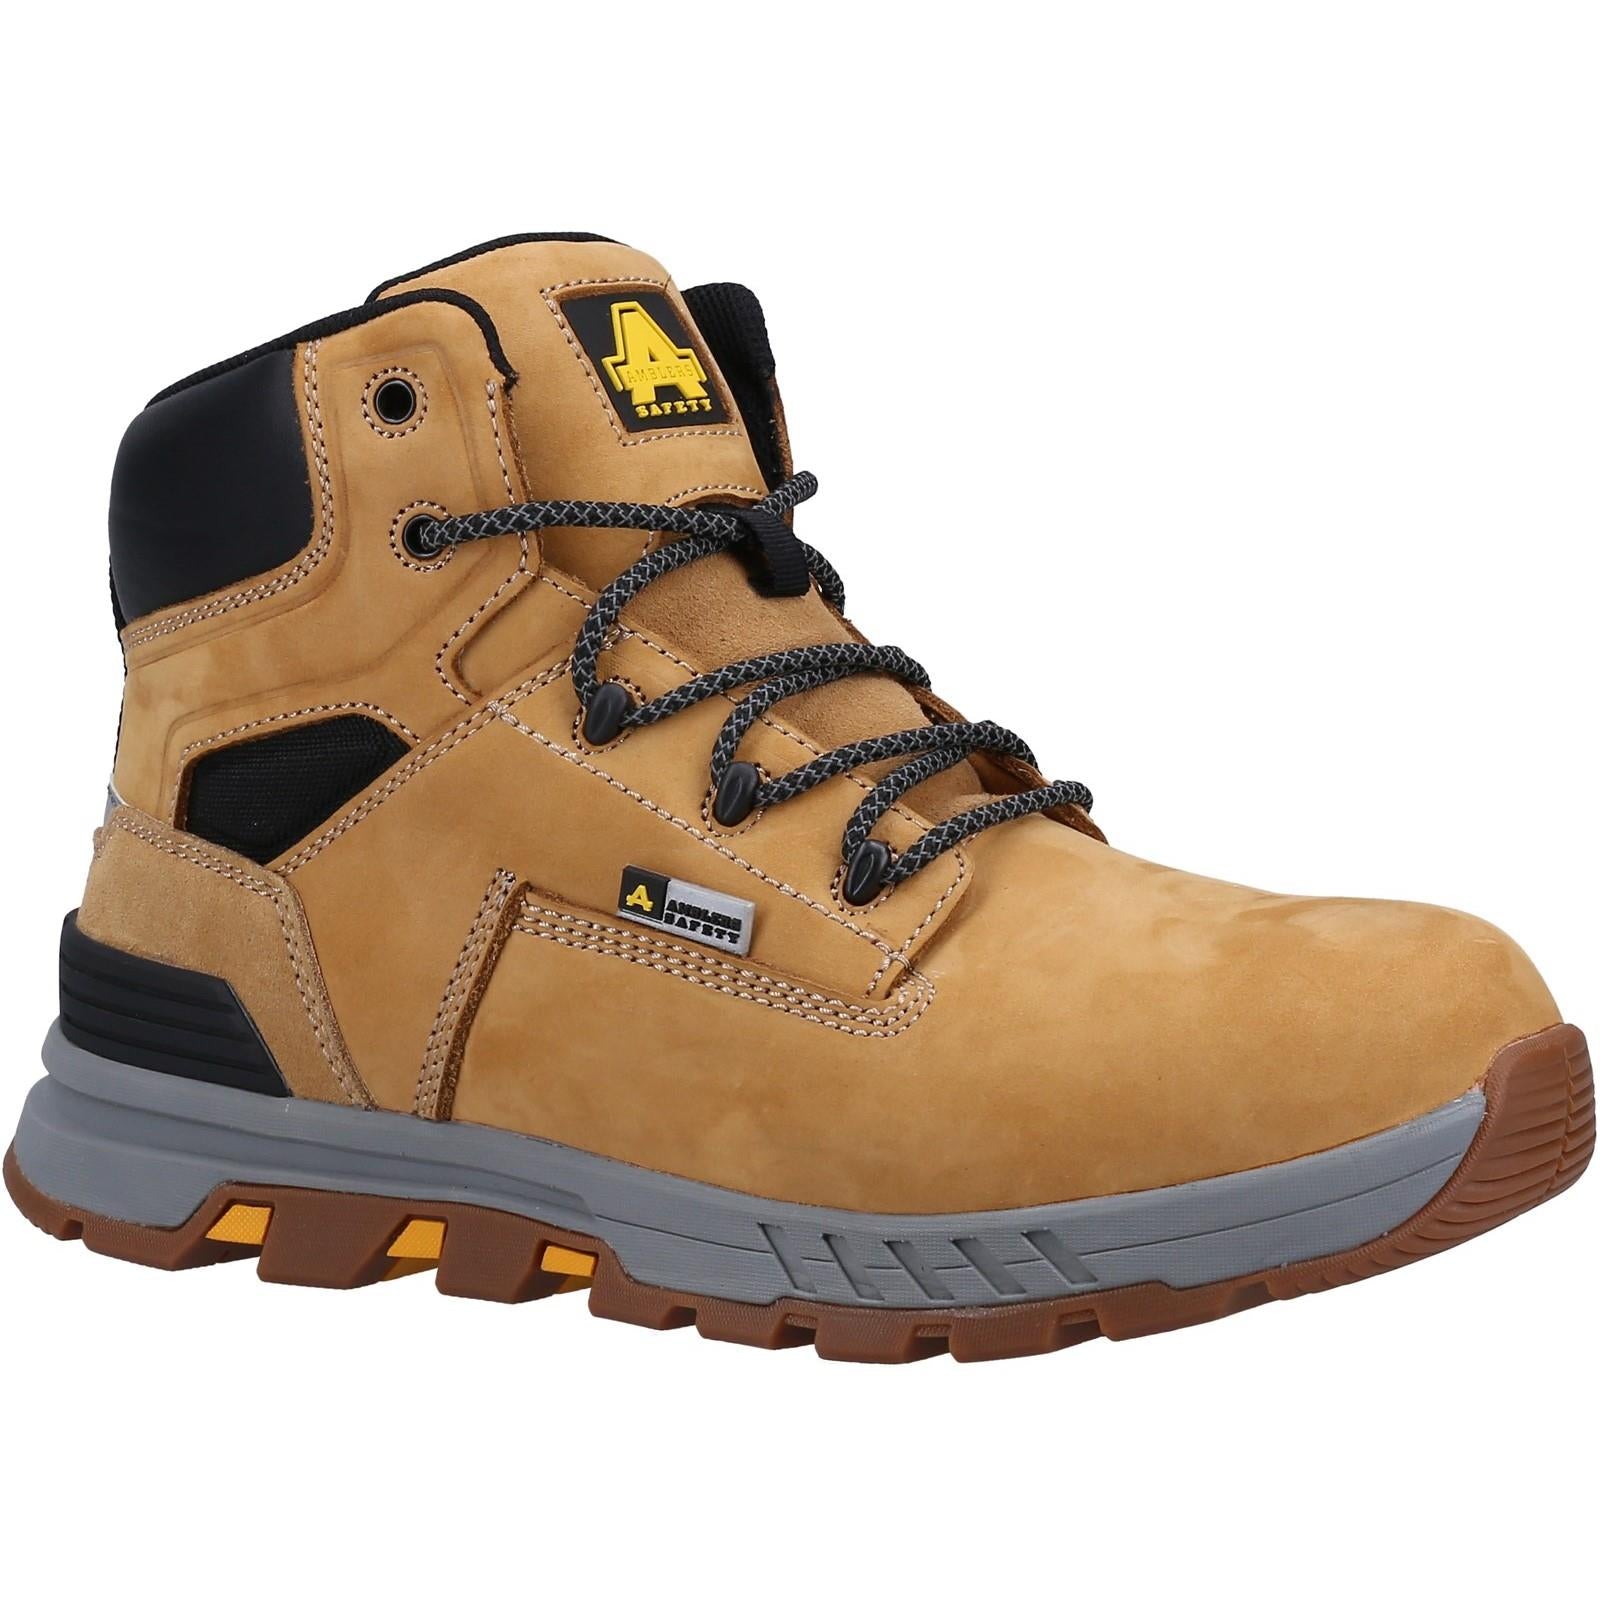 Amblers AS261 Crane S3 honey steel toe composite midsole work safety boots